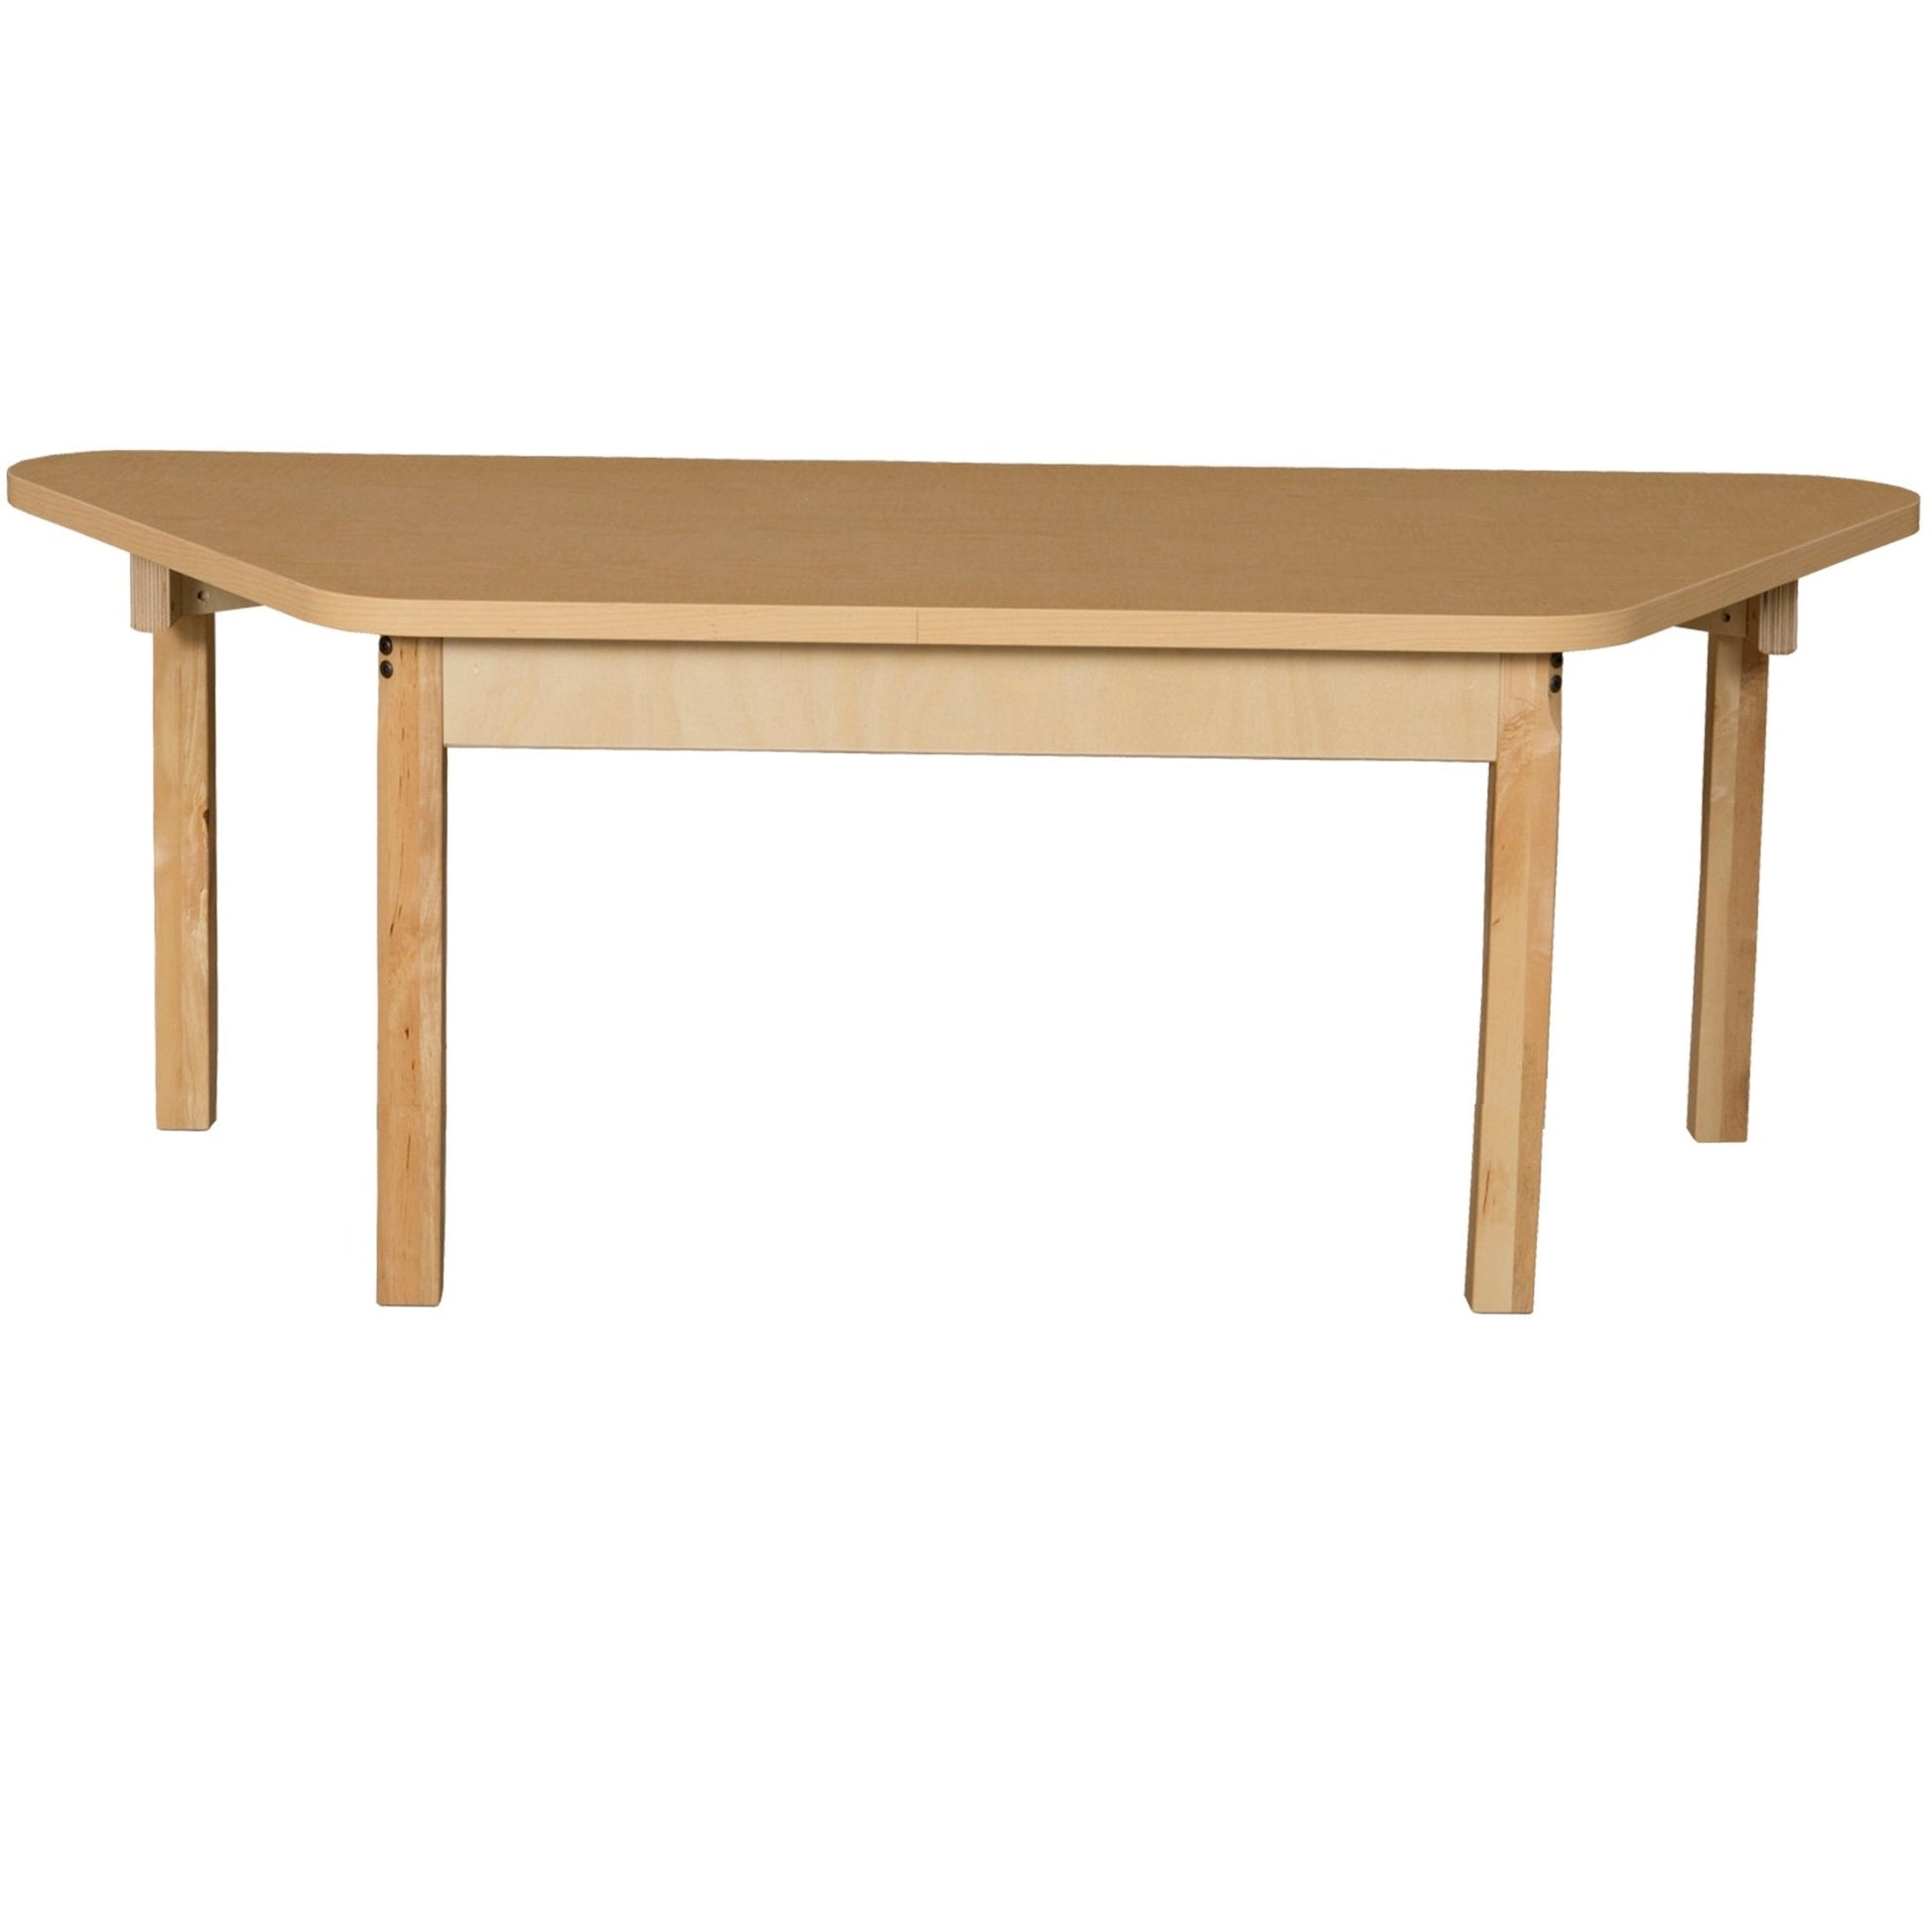 Wood Designs Trapezoidal High Pressure Laminate Table with Hardwood Legs-14" - (HPL3060TRPZ14) - SchoolOutlet